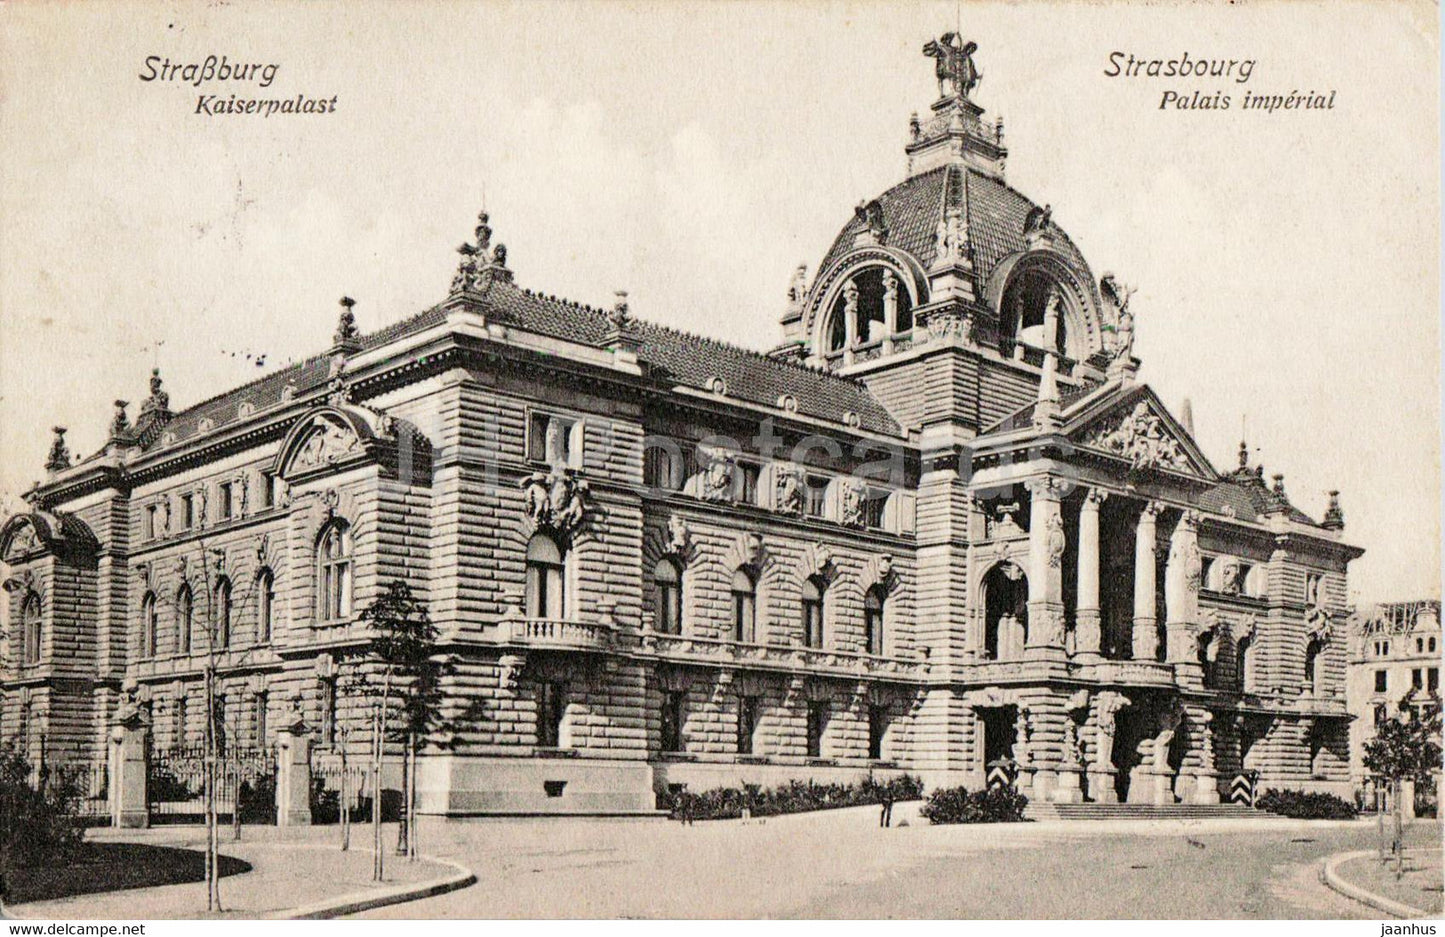 Strasbourg - Strassburg - Kaiserpalast - Palais Imperial - 68145 - old postcard - 1913 - France - used - JH Postcards